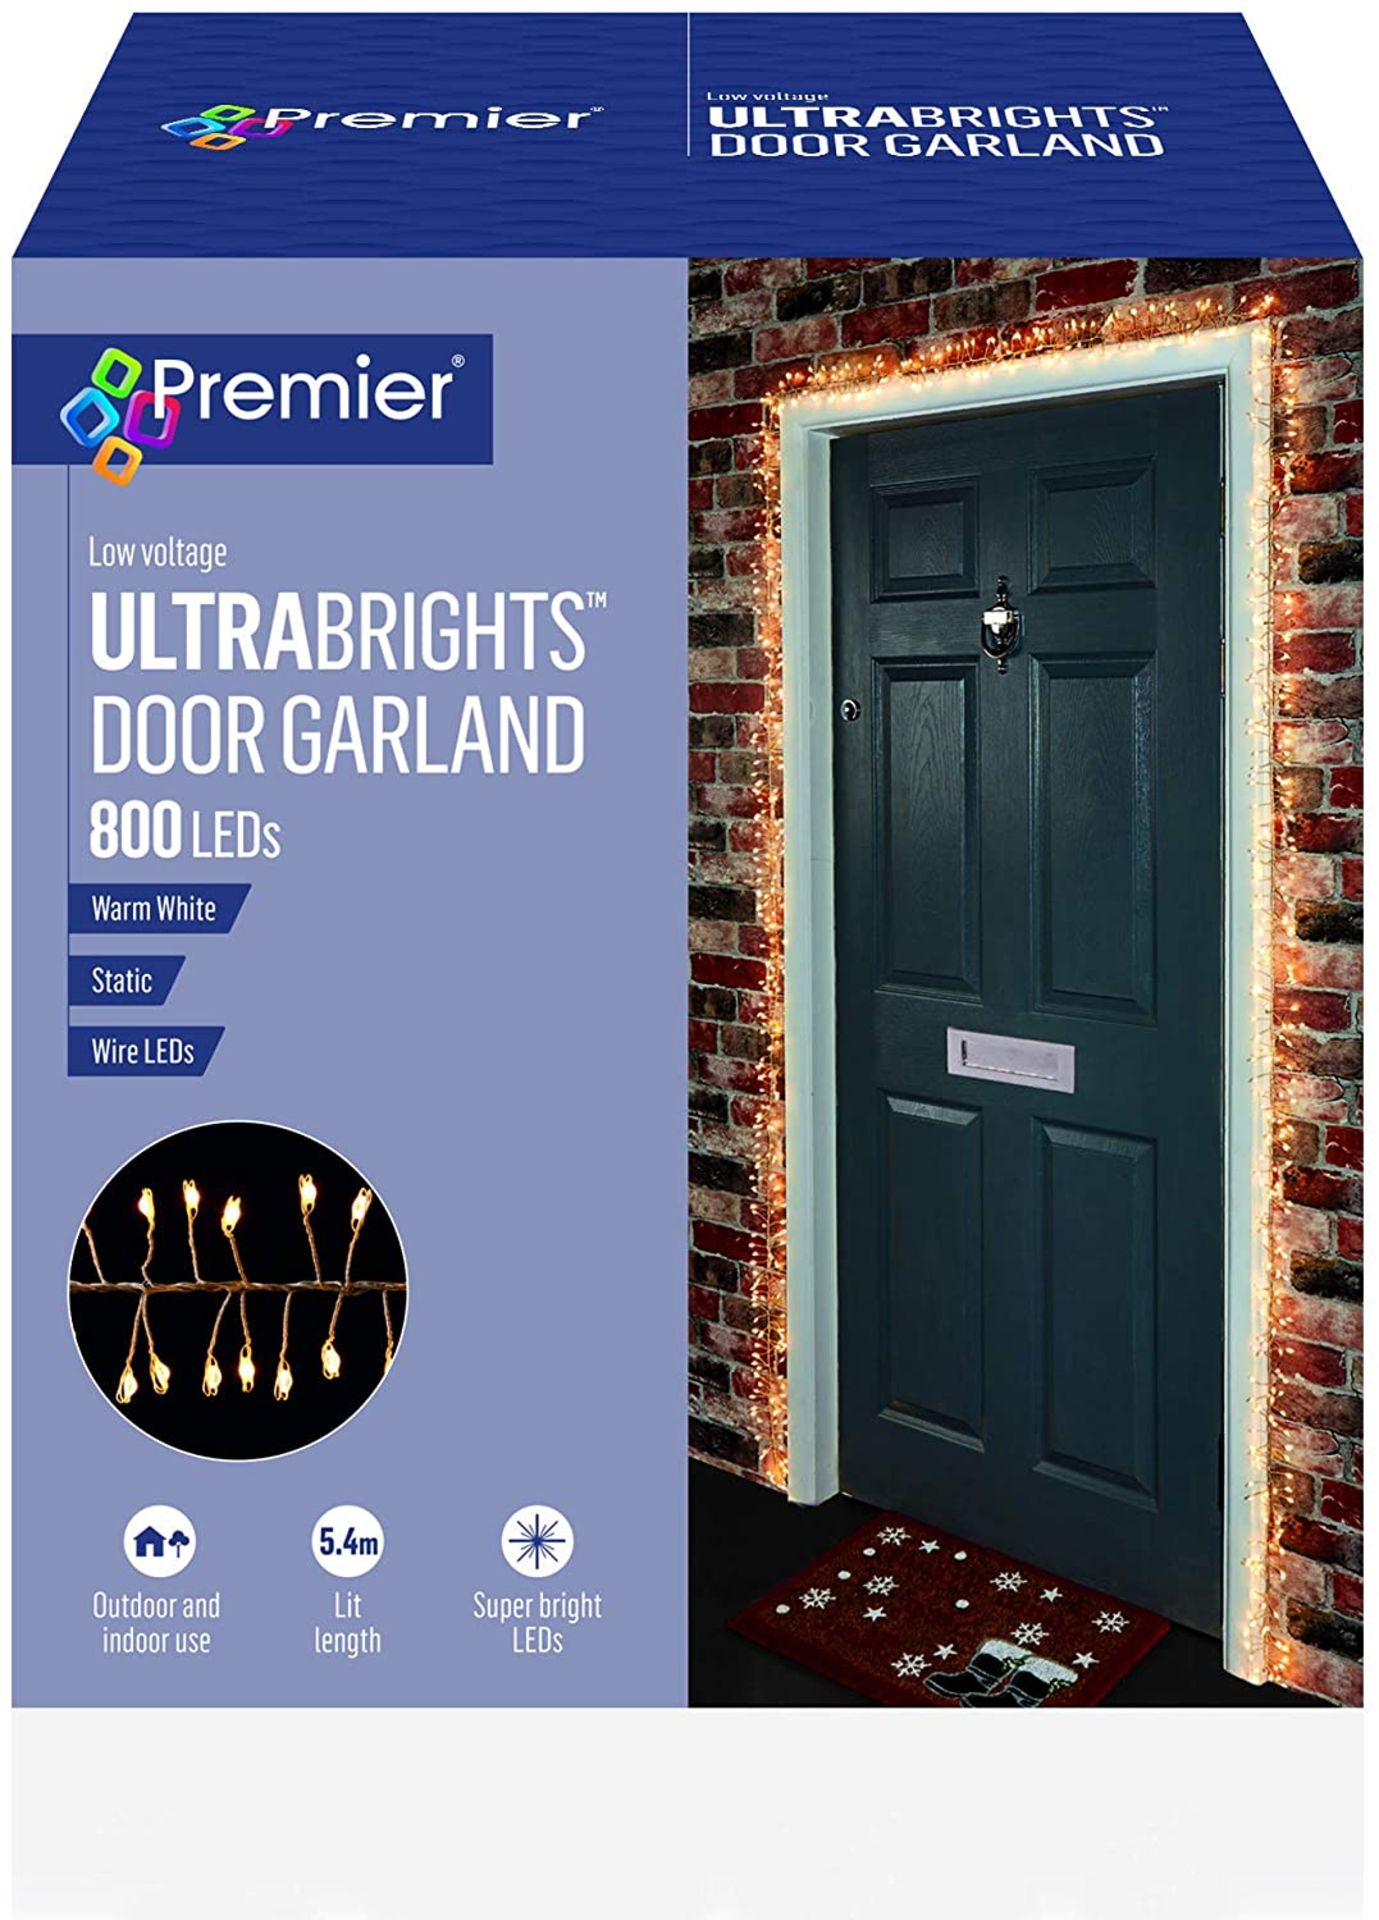 5.5m Ultrabrights Door Garland 800 LEDs in Warm White by Premier